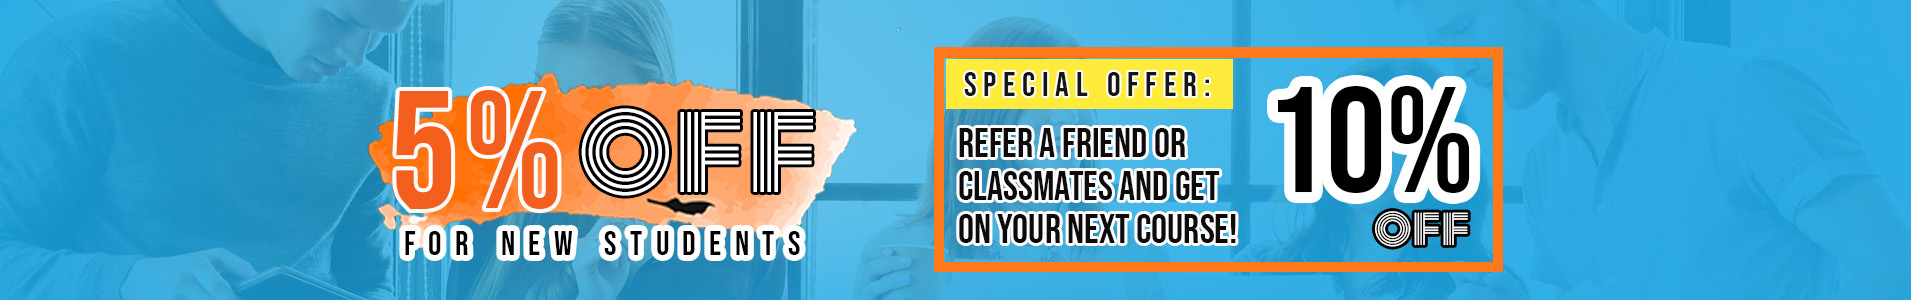 Refer a friend or classmates and you'll get 10% off on your next course